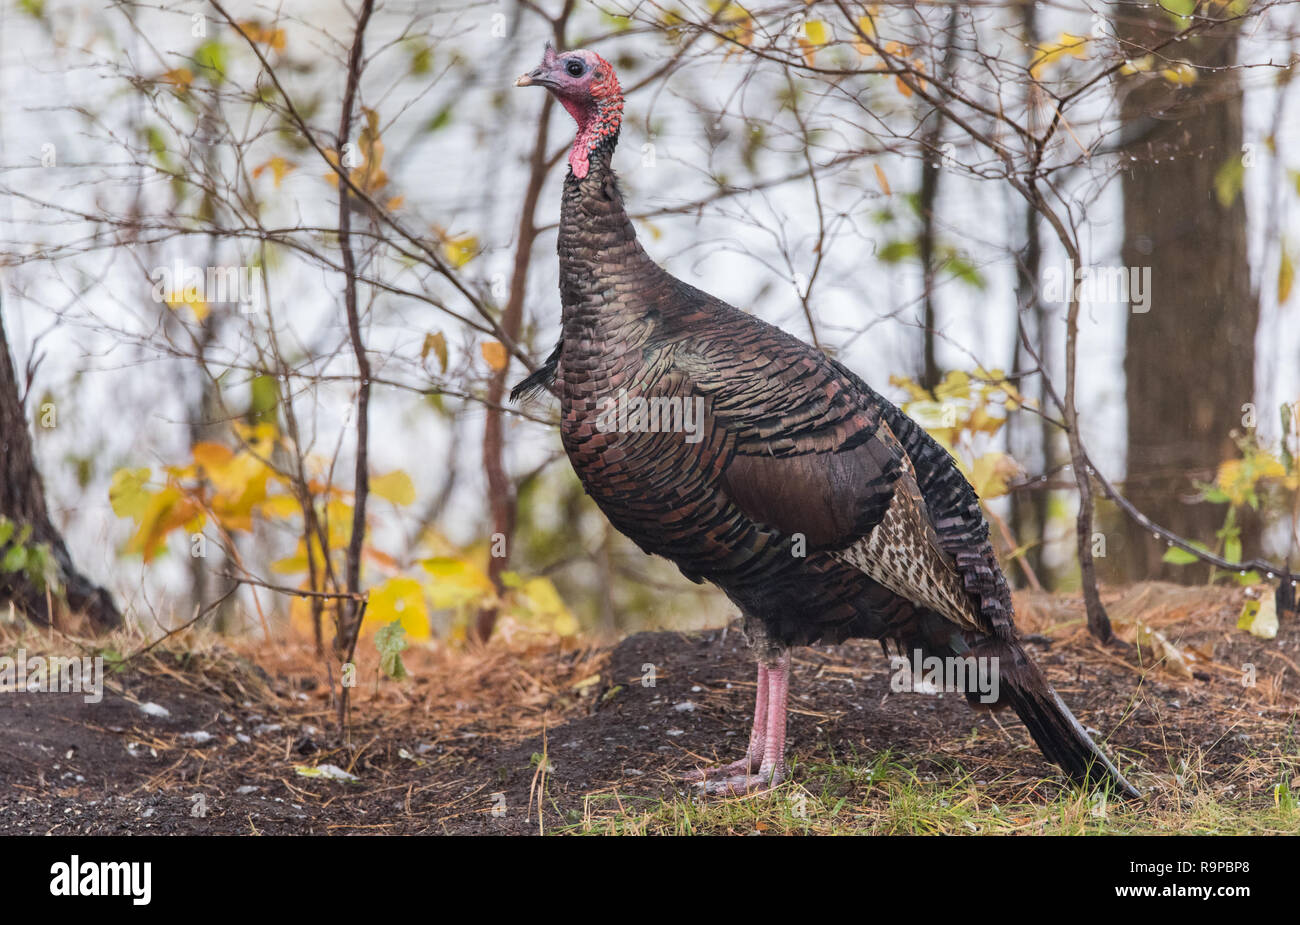 Eastern Wild Turkey (Meleagris gallopavo silvestris) hen in a autumn colored wooded yard pauses momentarily as if to pose for the camera. Stock Photo